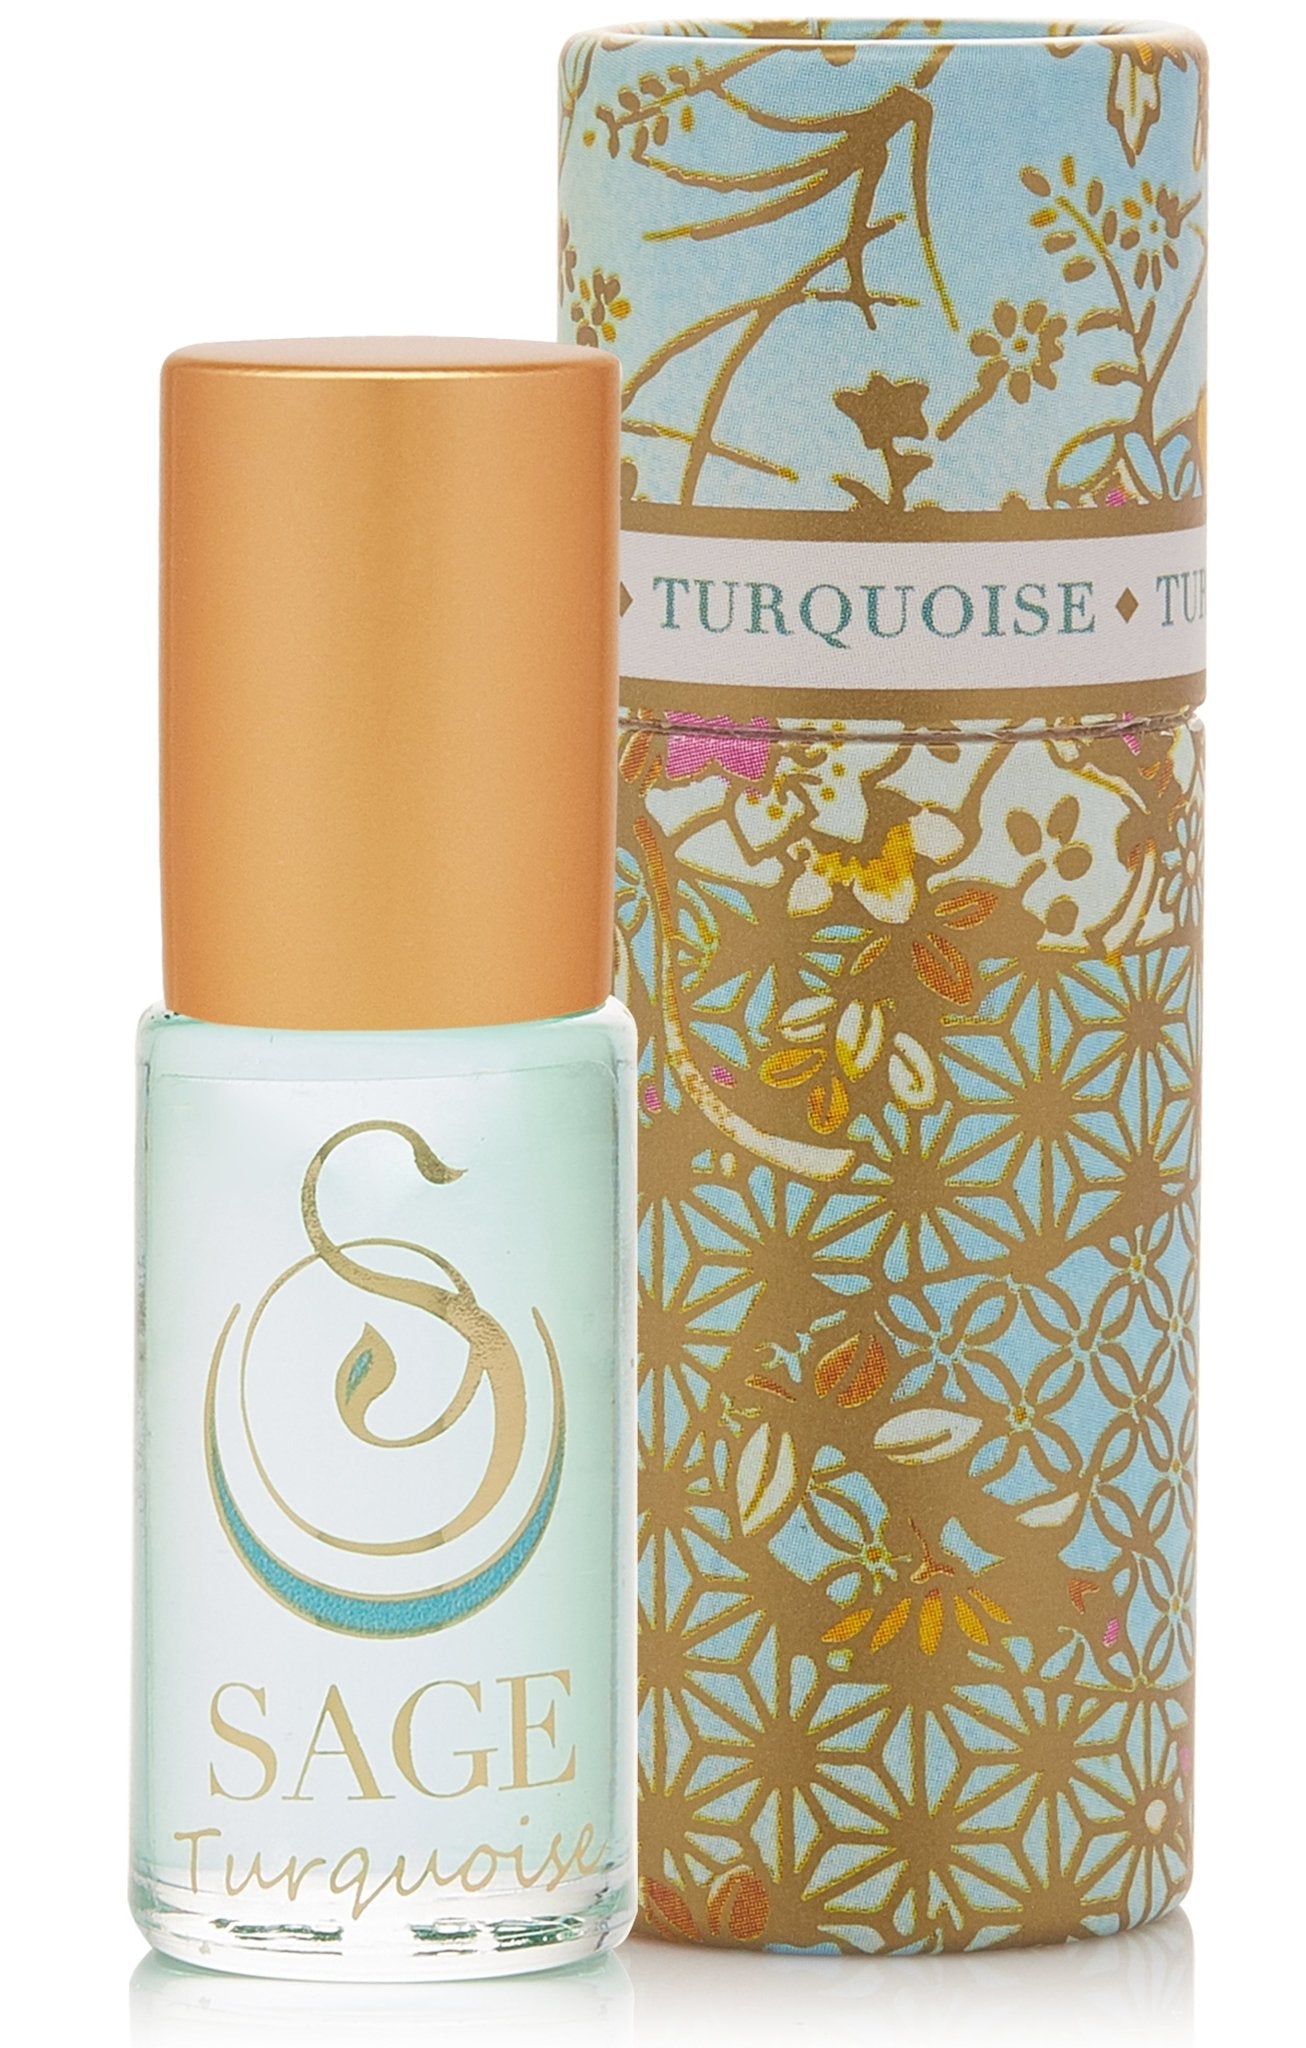 OBSESSION ~ Turquoise Gemstone Perfume Roll-On and EDT Gift Set by Sage - The Sage Lifestyle